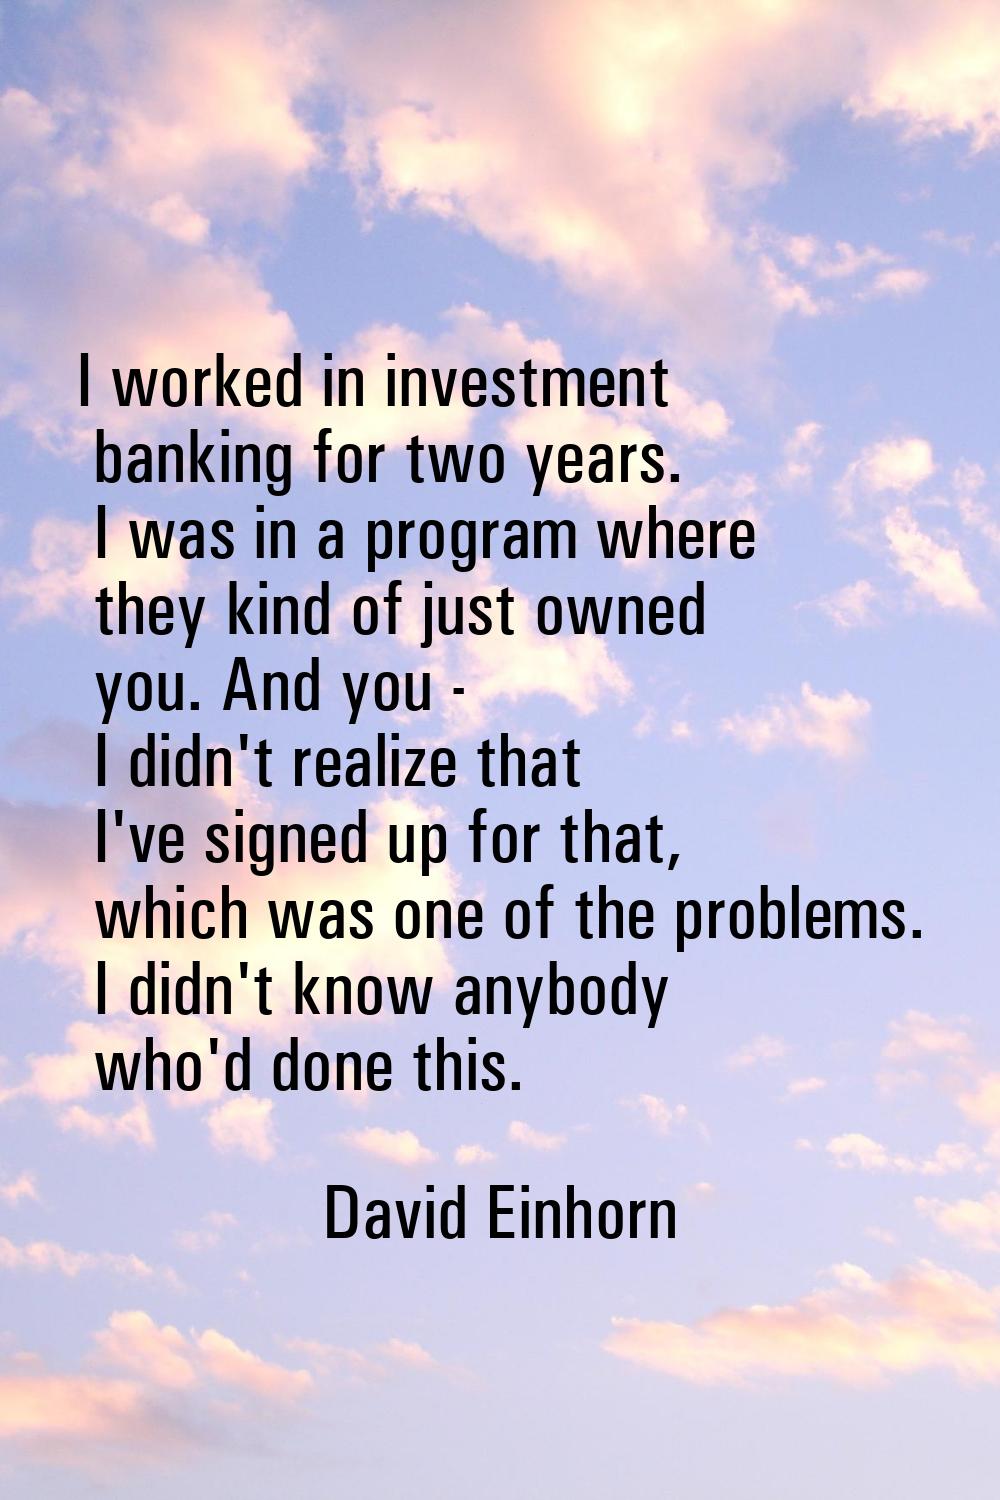 I worked in investment banking for two years. I was in a program where they kind of just owned you.